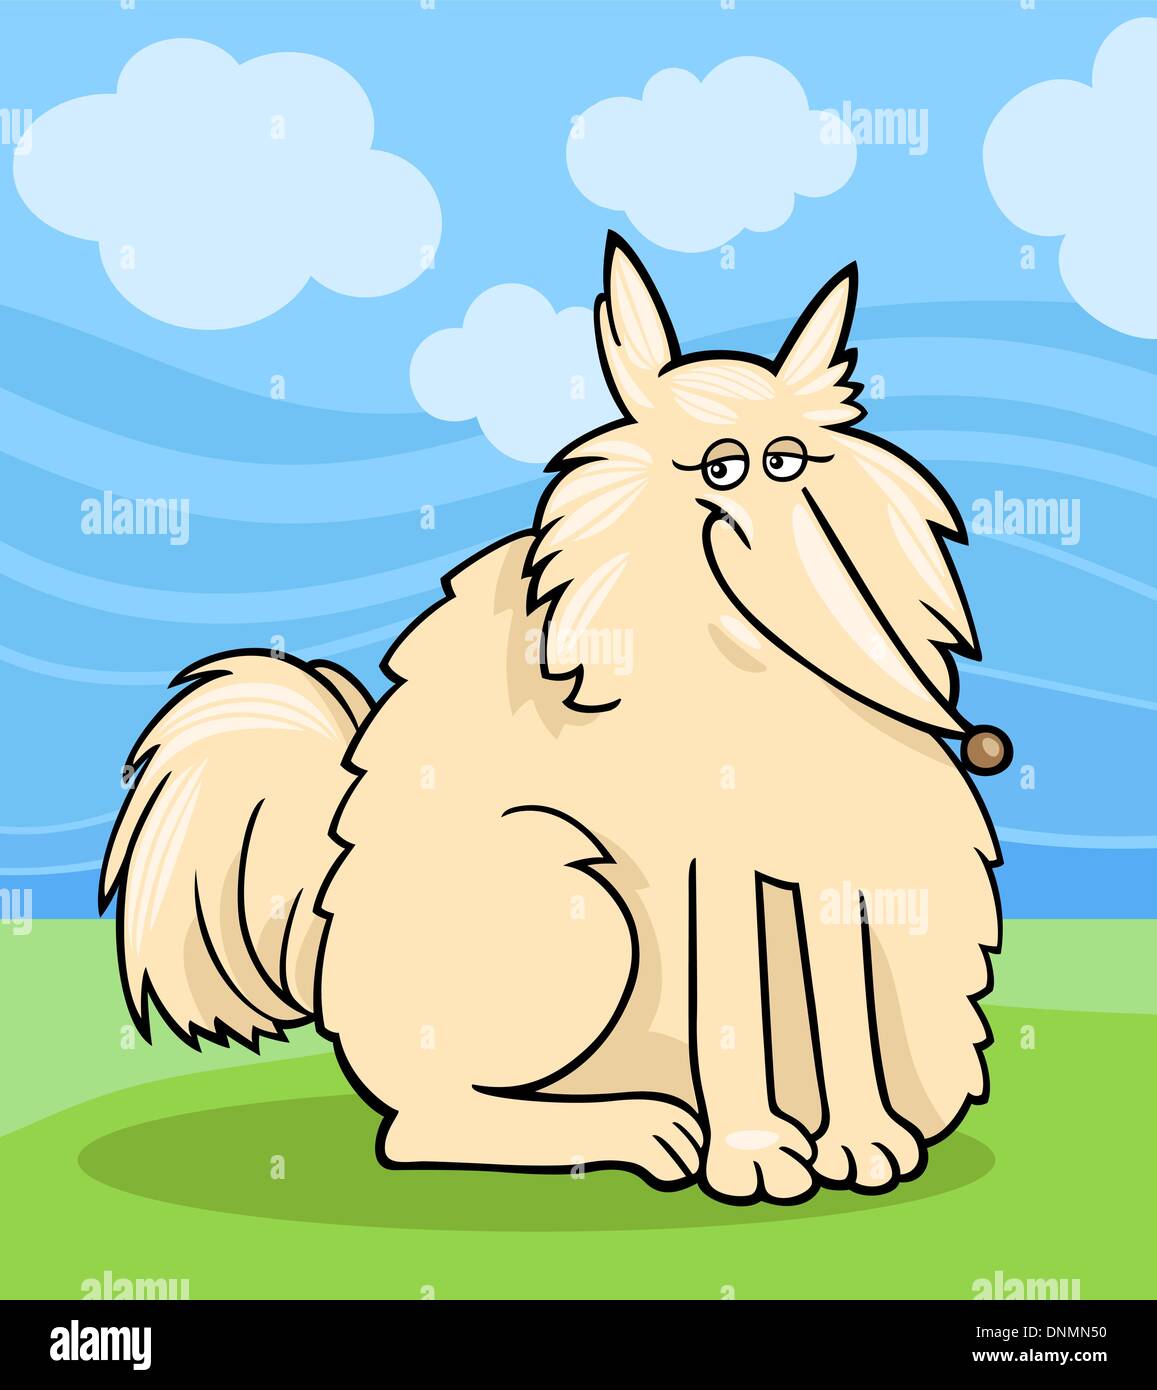 Cartoon Illustration of Funny Purebred Eskimo Dog or Spitz against Blue Sky and Green Grass Stock Vector